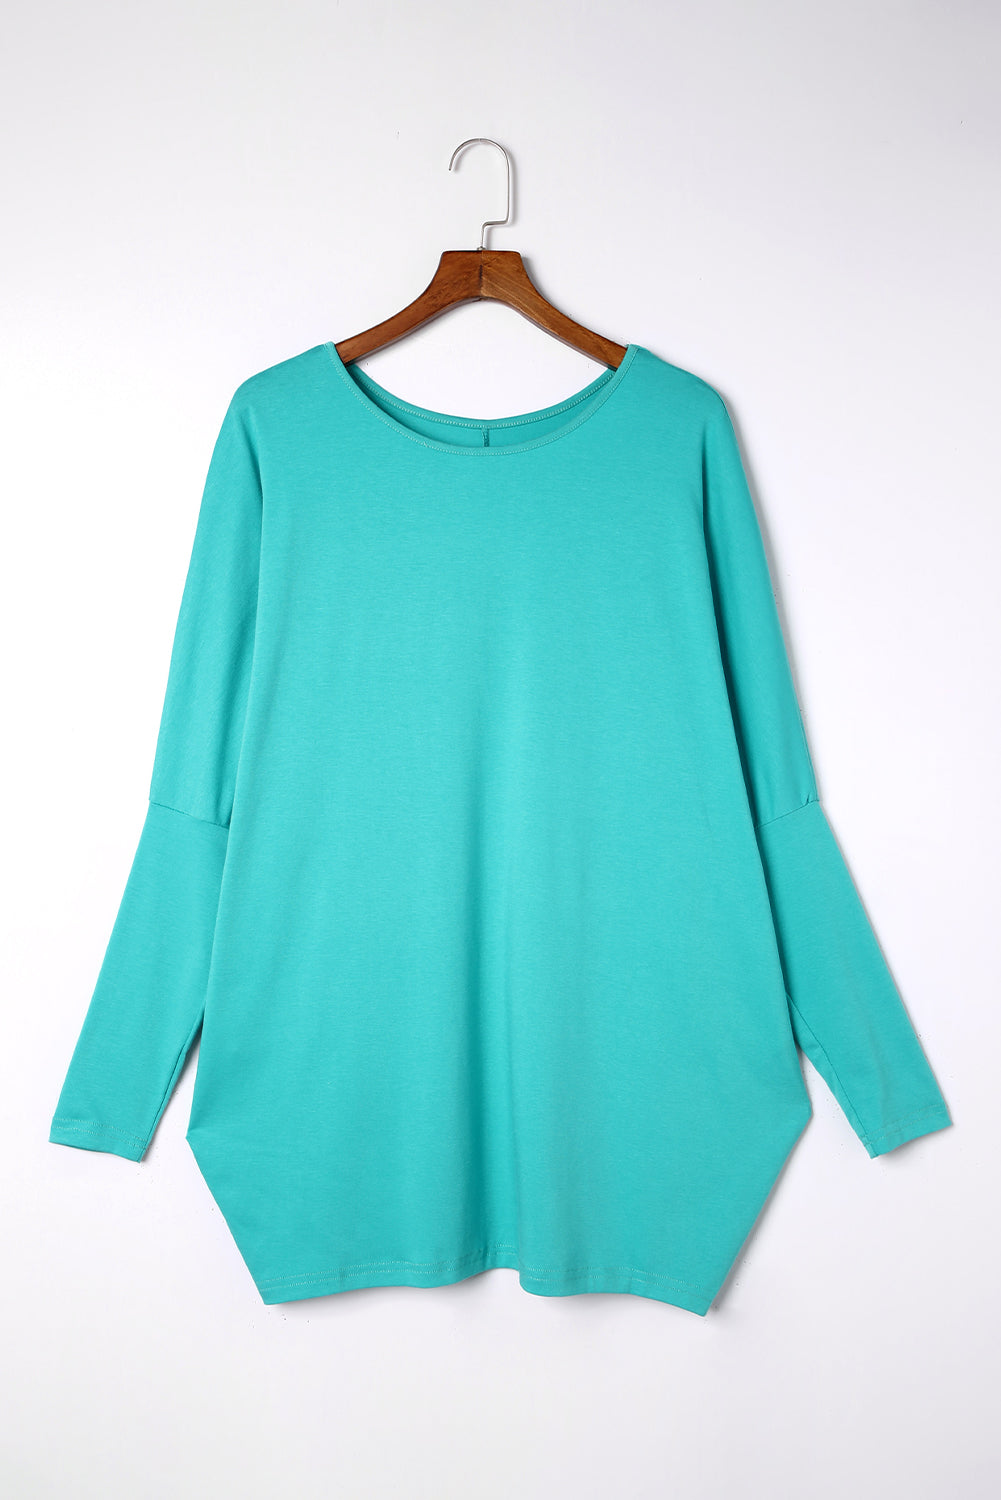 Batwing Sleeves Loose Knit Tunic Top